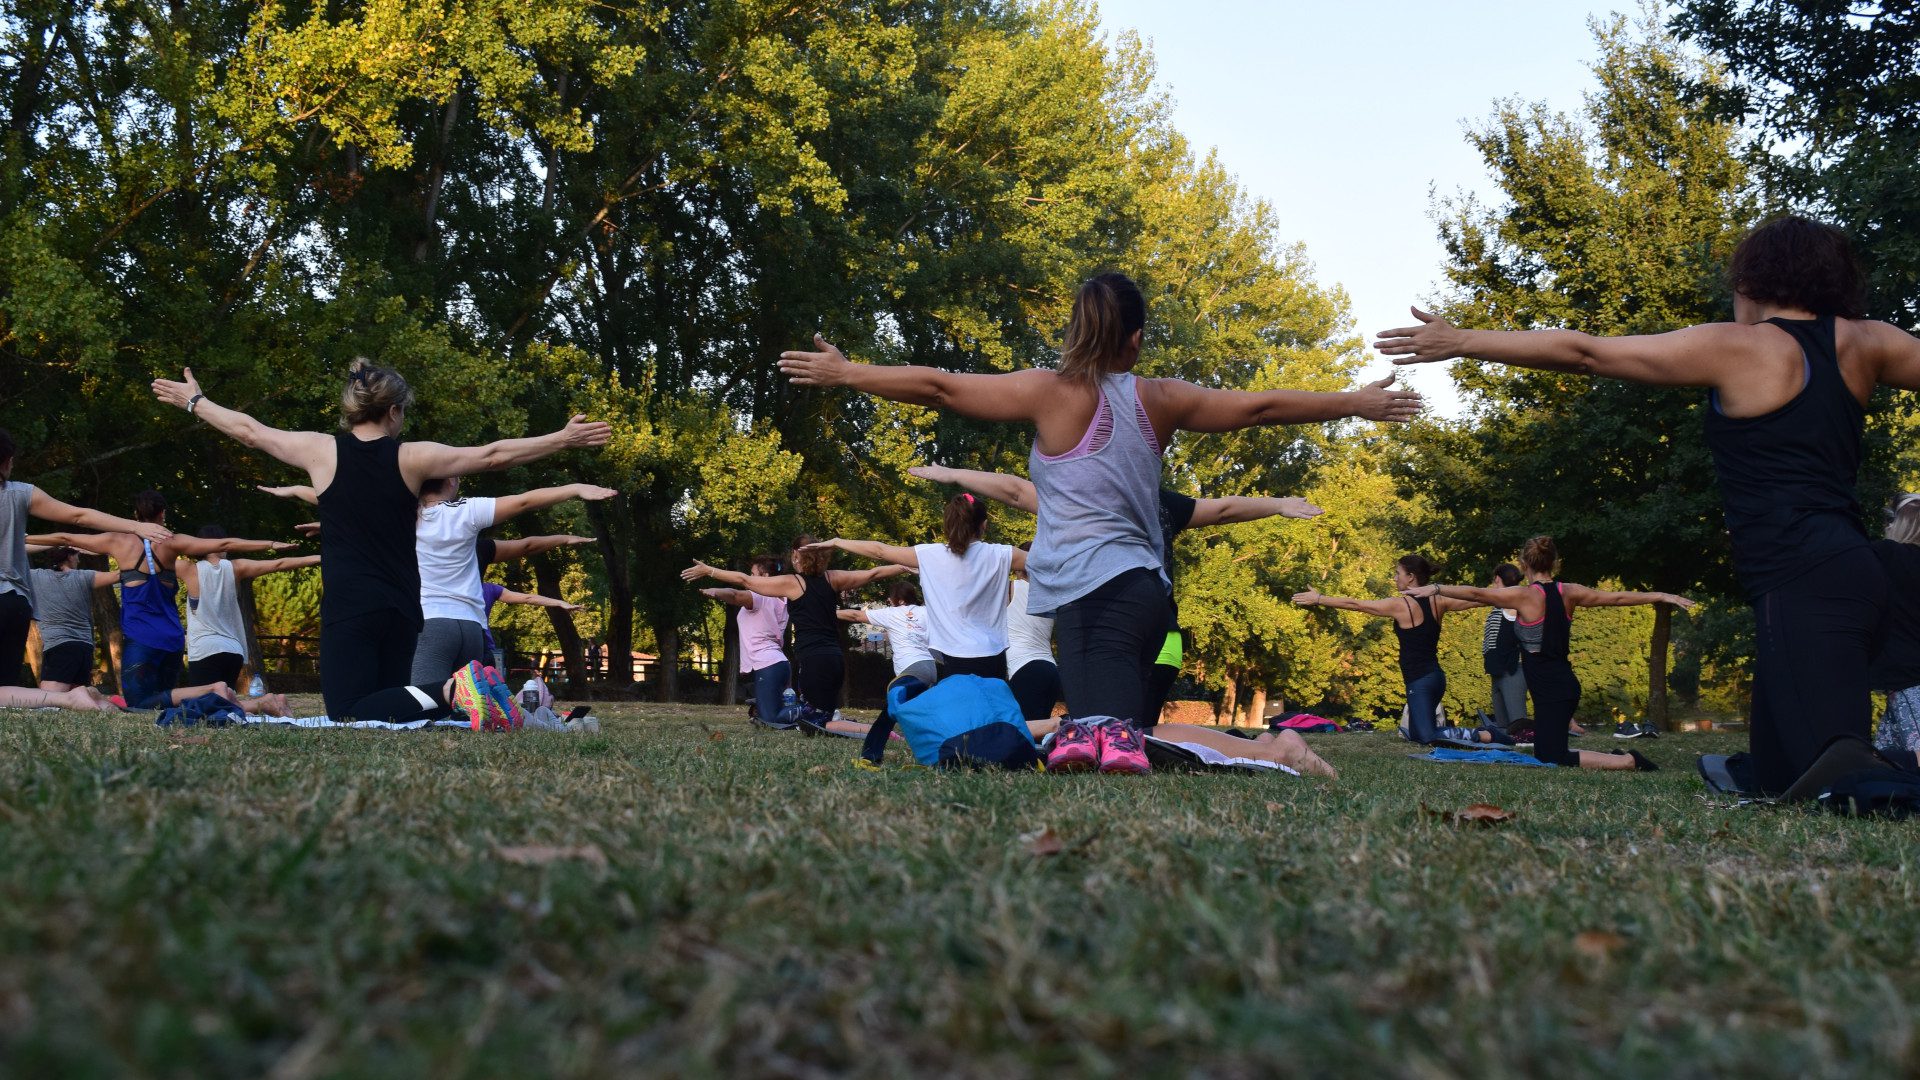 A group of people doing yoga in the park.